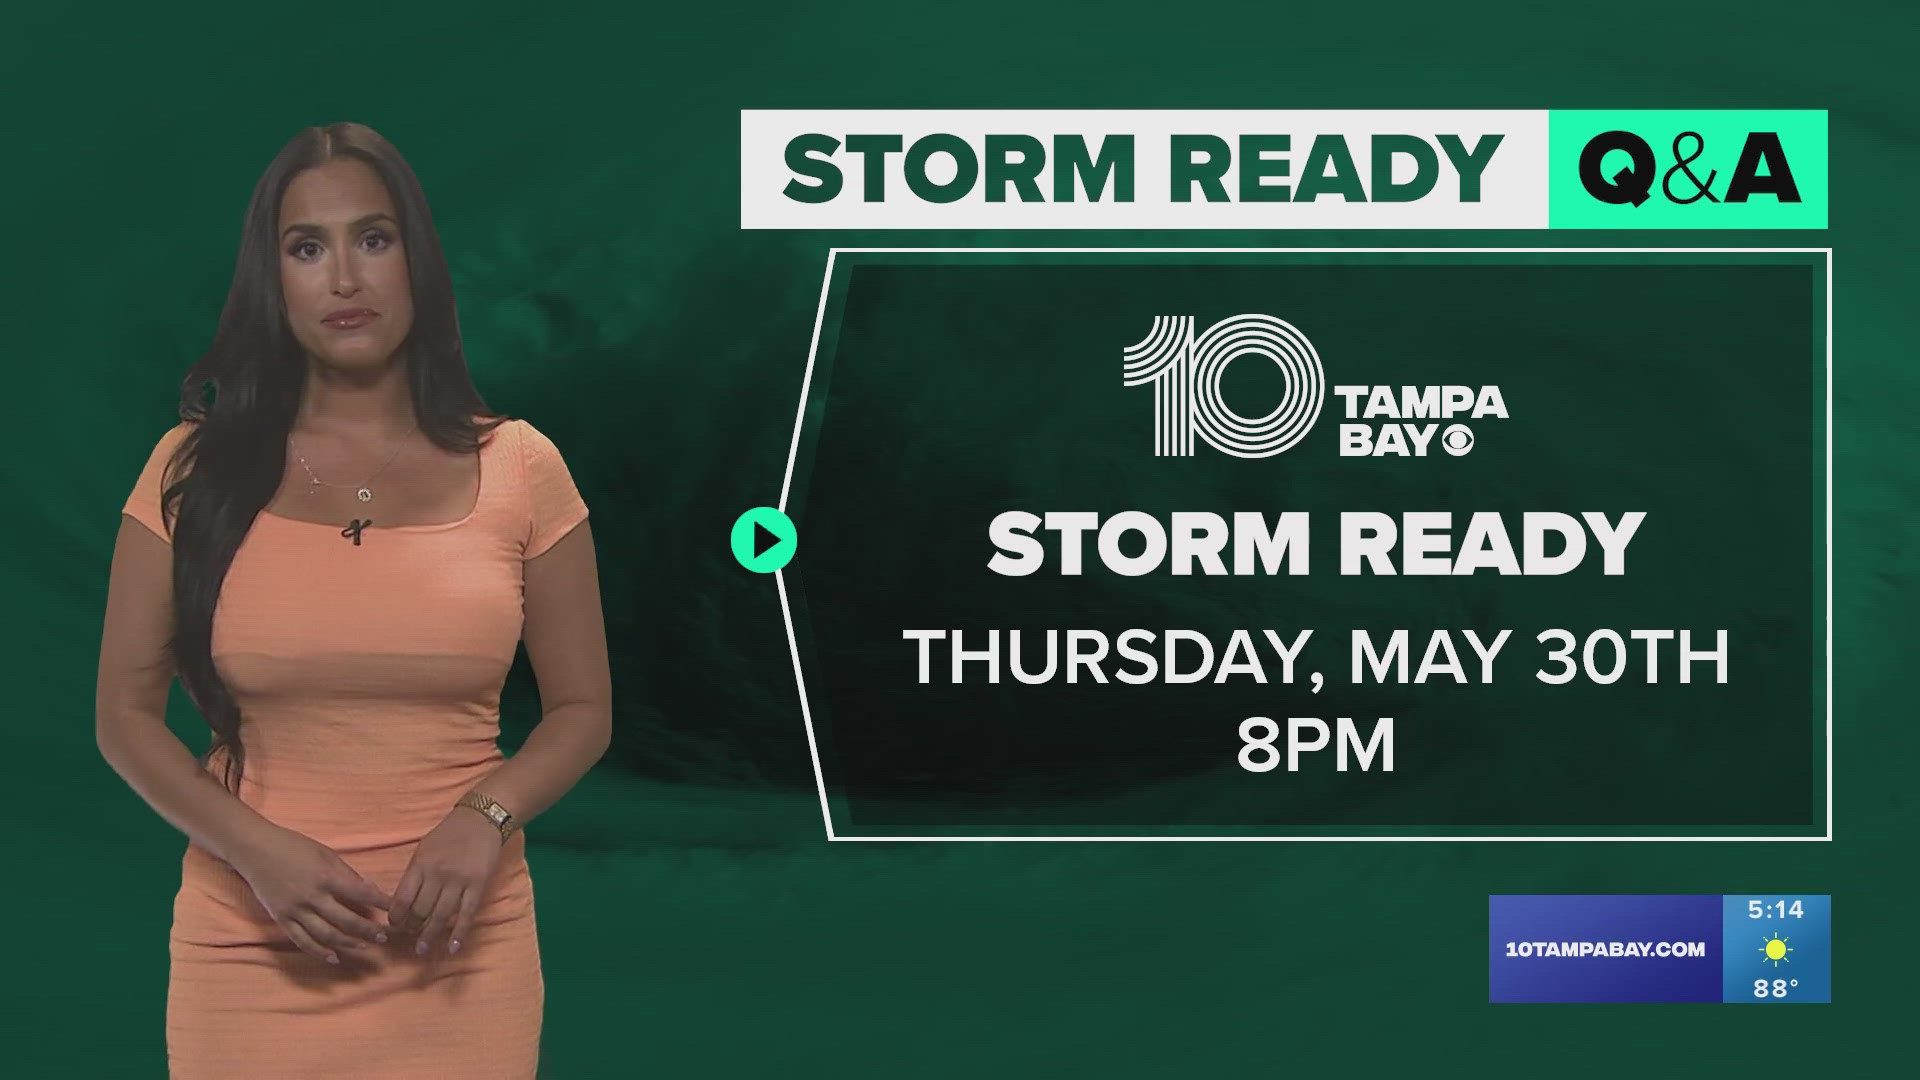 10 Tampa Bay is your hurricane headquarters, so all week we’re answering your questions to keep you informed, prepared and connected.